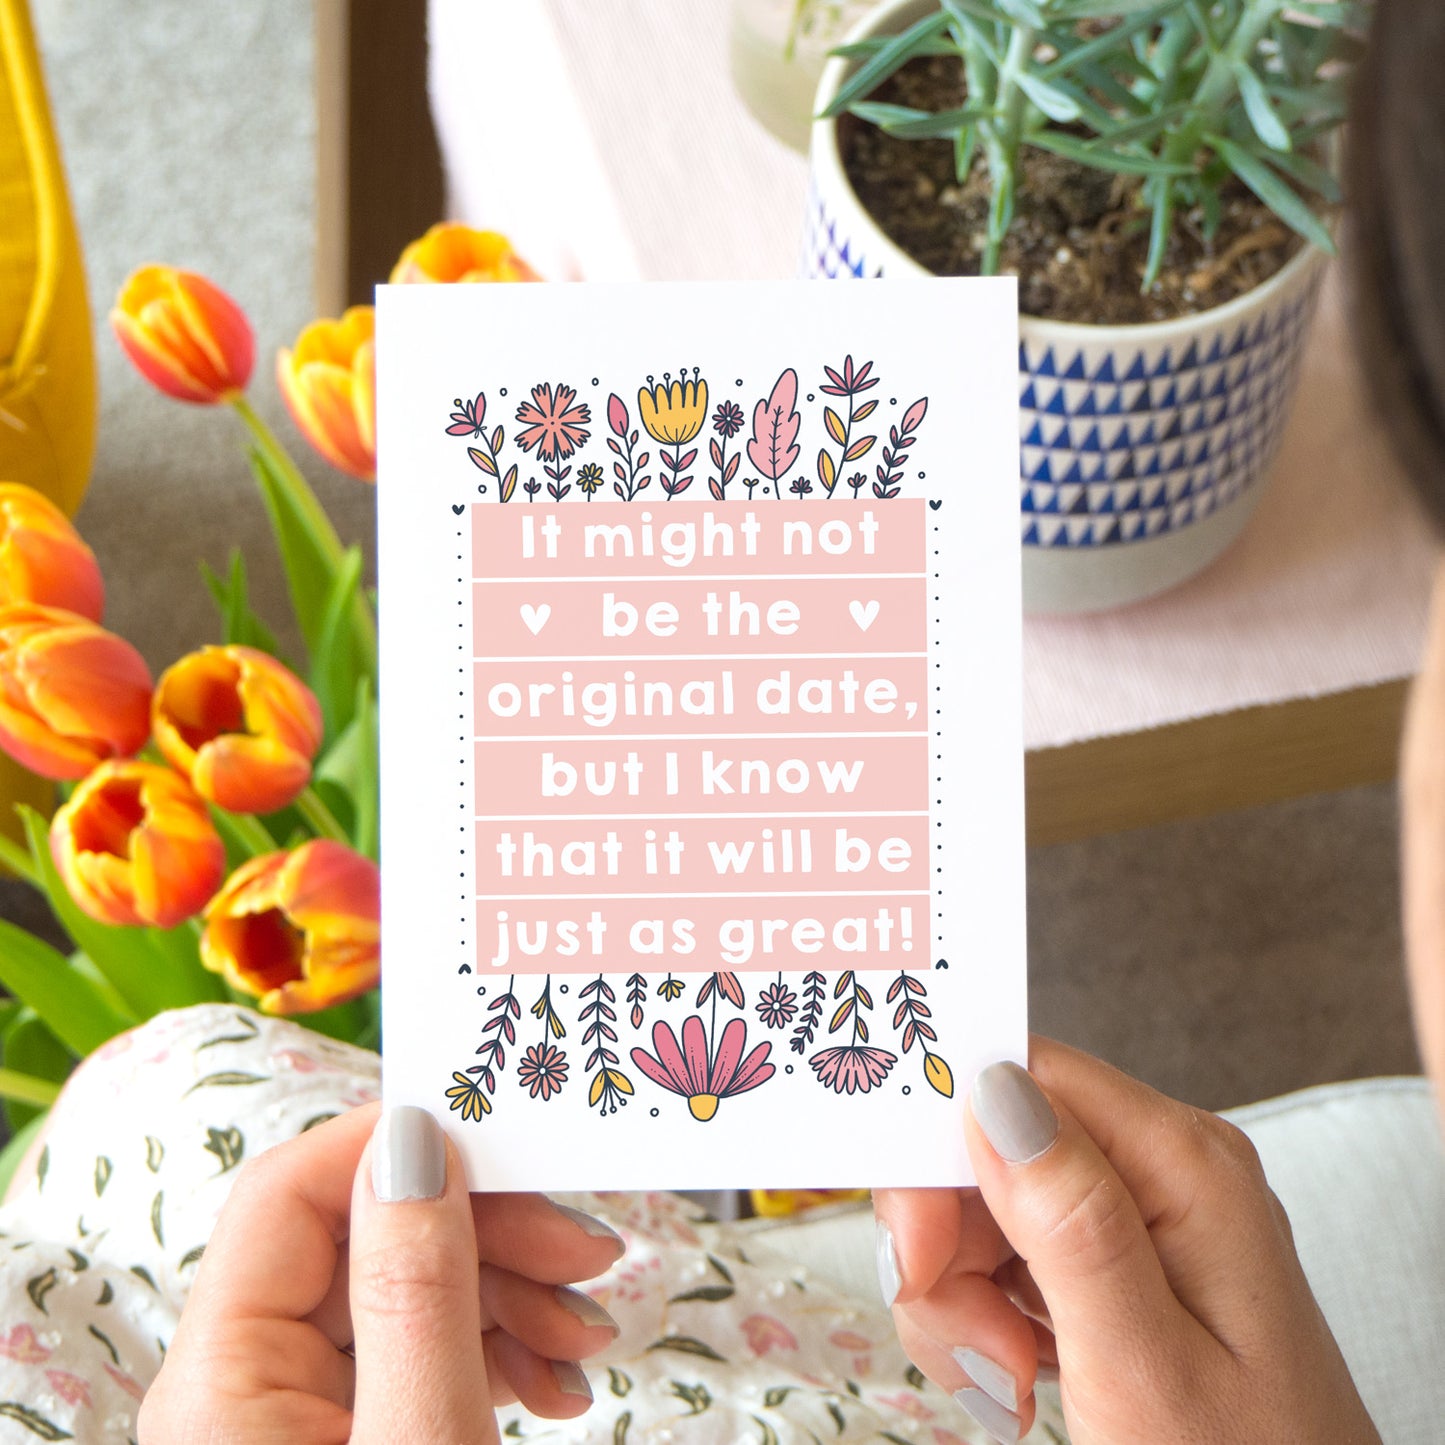 Original wedding date card for wedding postponements or delays. Photographed in a lifestyle setting with tulips, a person and plants on a table.. The card features pink block of text and hand drawn florals.